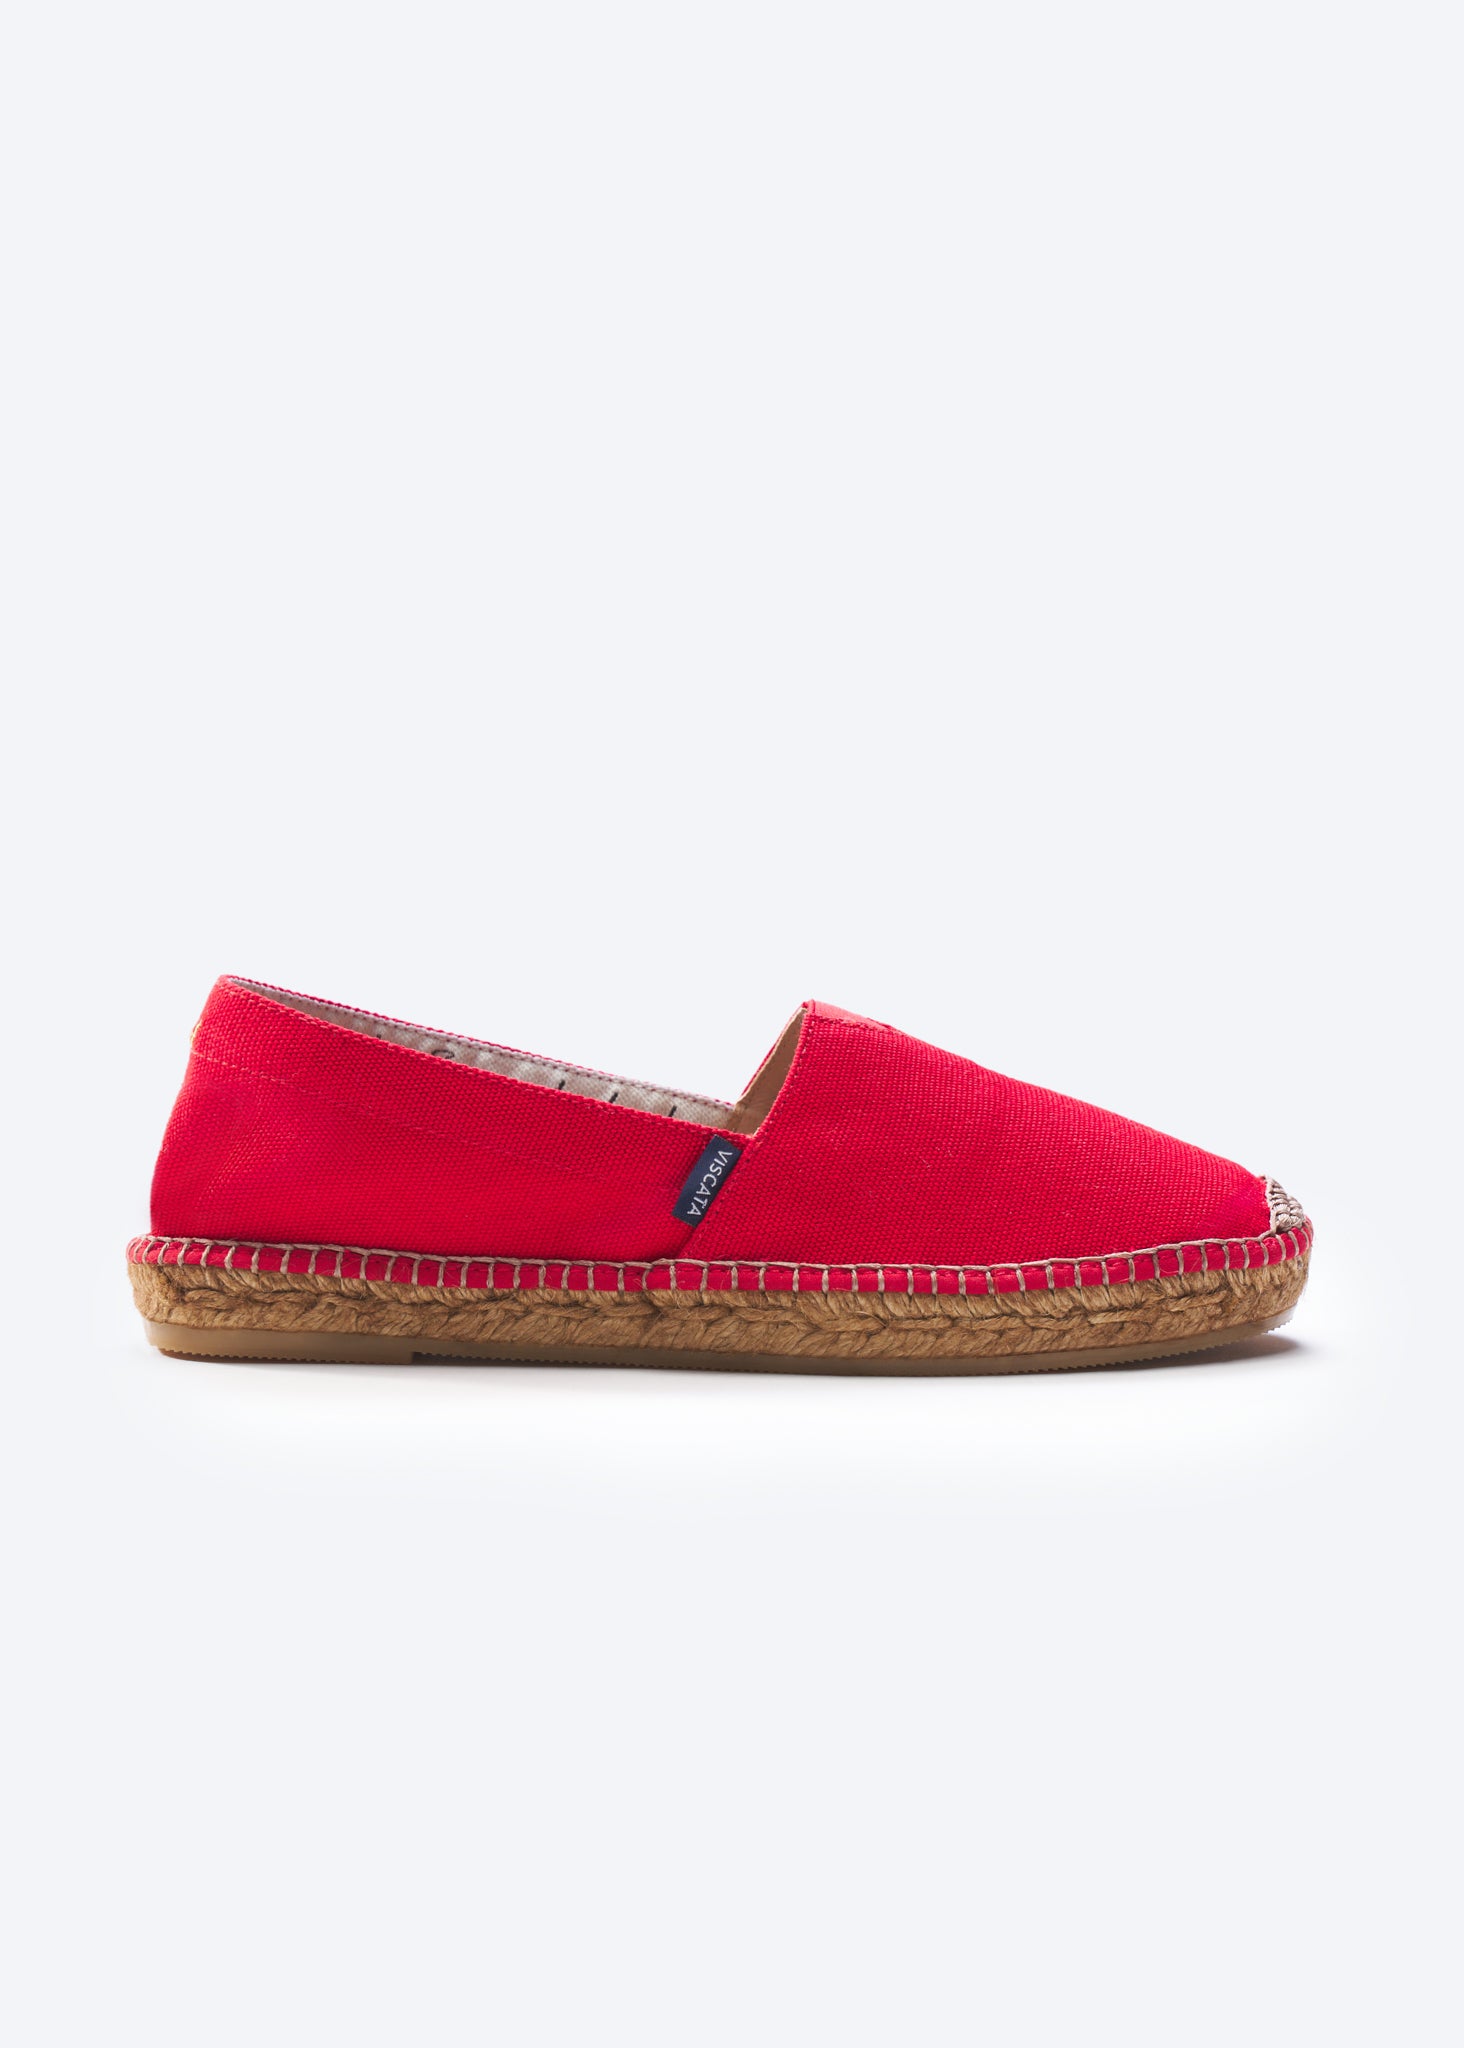 Viscata Barceloneta Canvas Espadrilles Limited Edition In Red